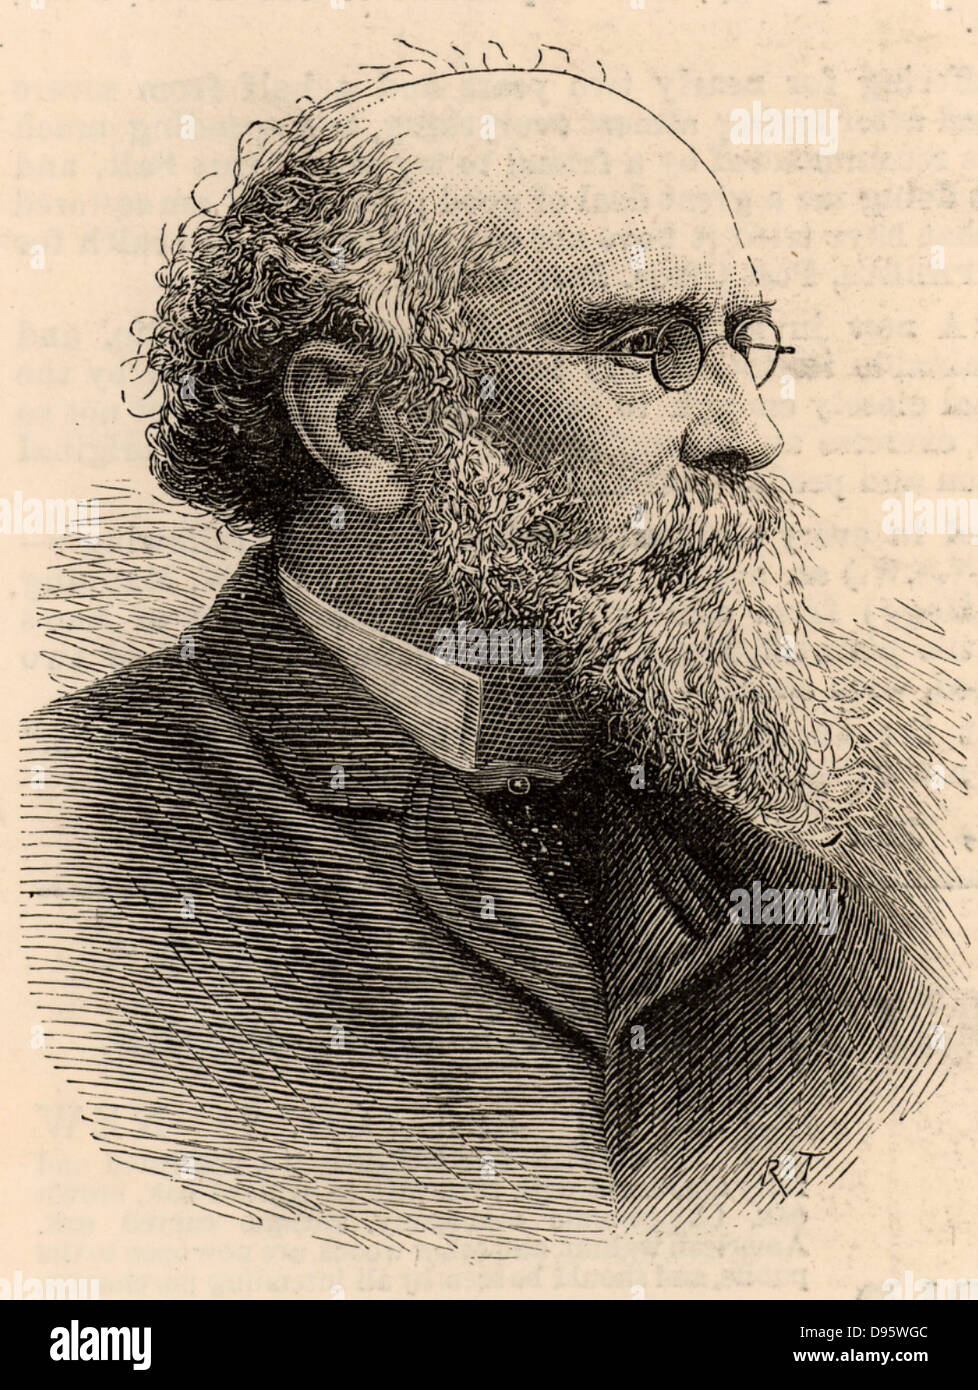 Thomas Storey (1825-1898) English industrialist and philanthropist from Lancashire. Storey was a mine owner, a mill owner, and leather manufacture, who made his fortune in the manufacture of oil-cloth and linoleum.  Mayor of Lancaster (1887). Engraving from 'The Illustrated London News' (6 August 1887). Stock Photo